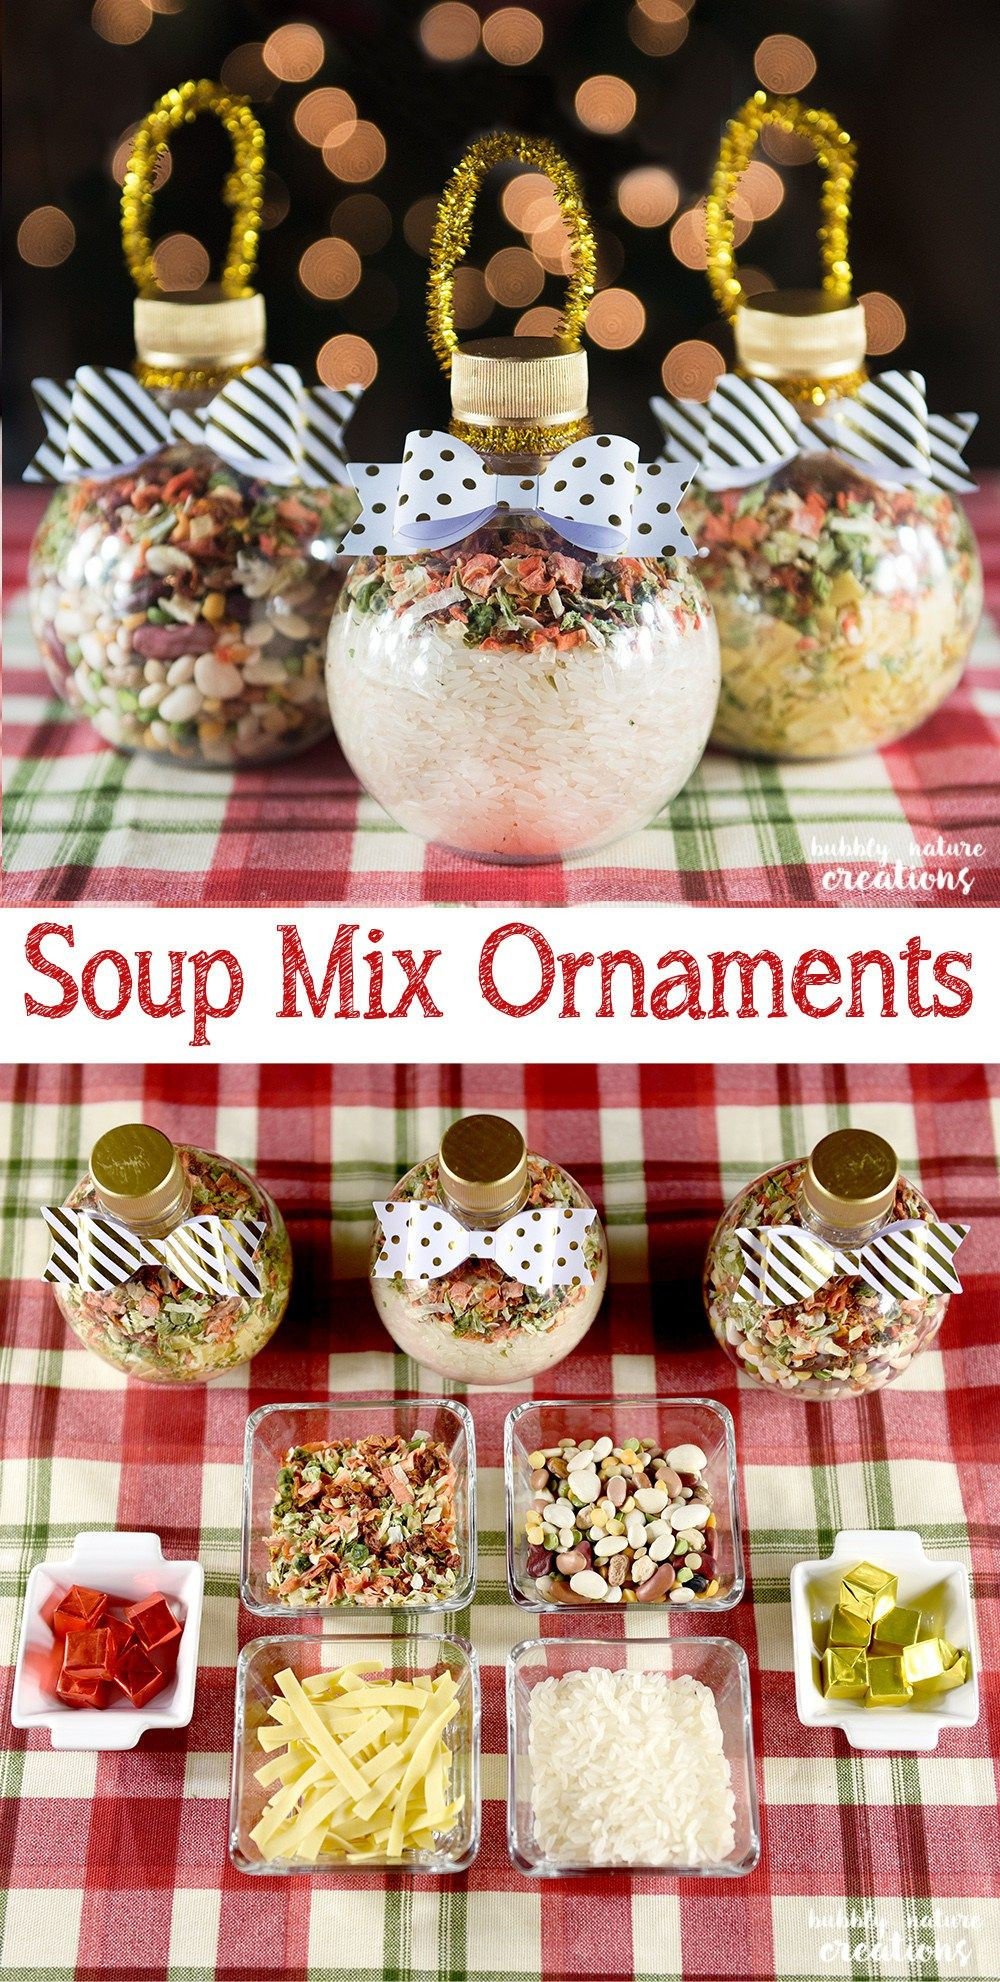 DIY Gifts Ideas For Christmas
 Soup Mix Ornaments Recipe Projects to Try